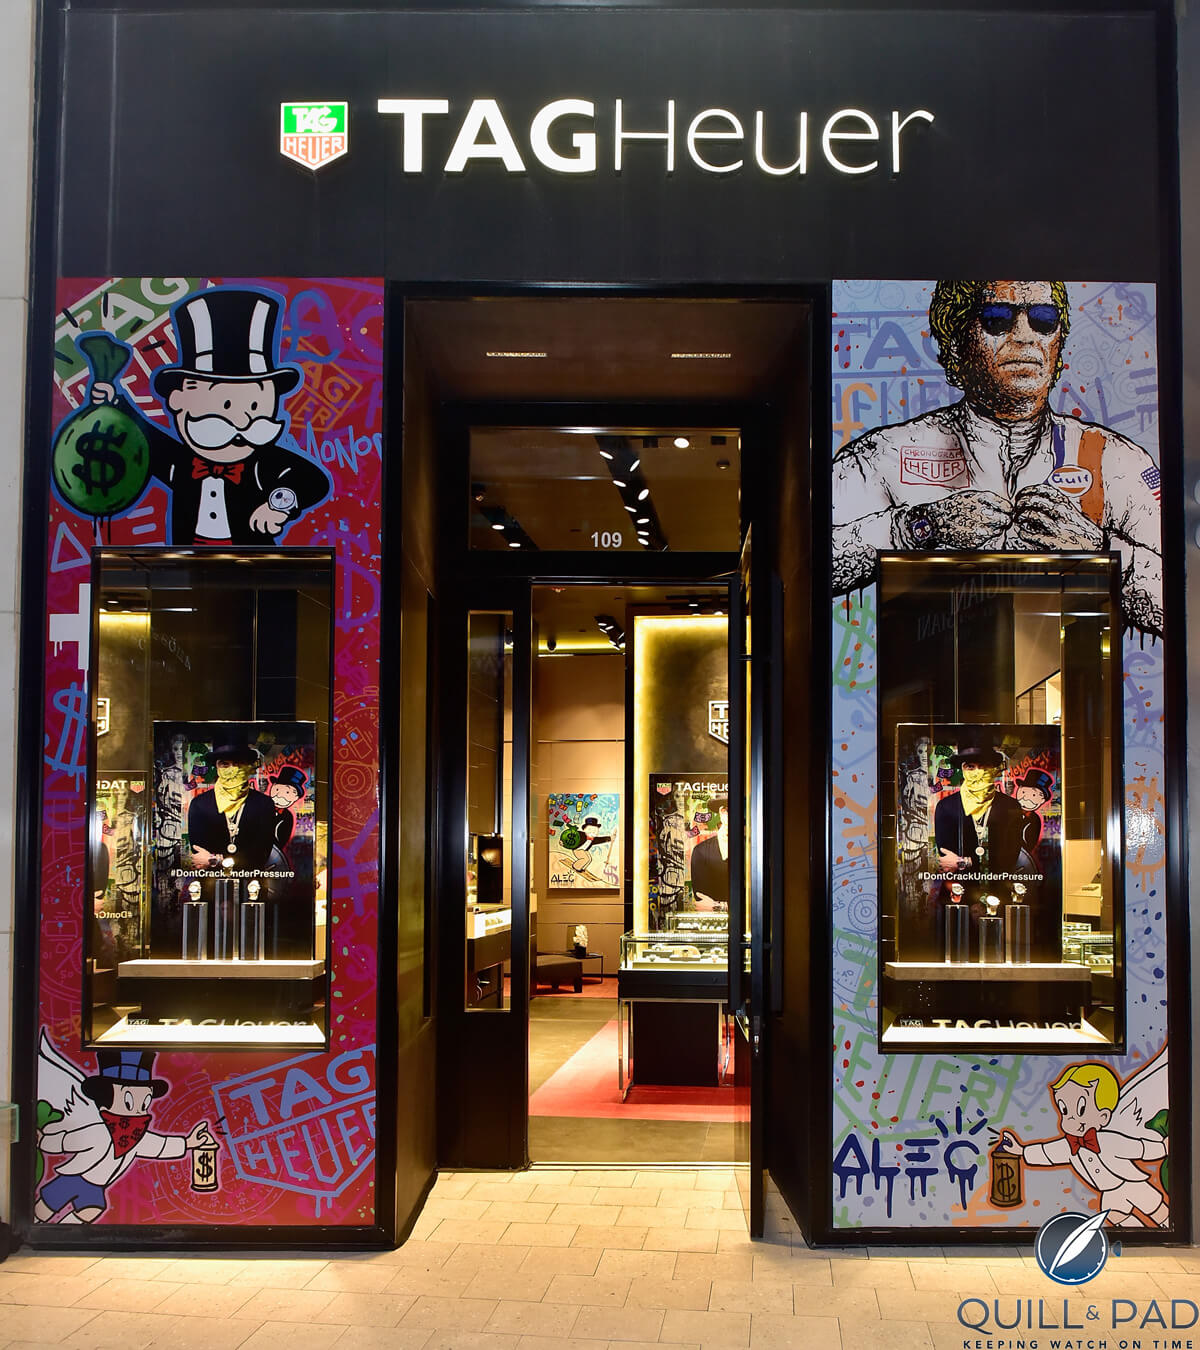 The TAG Heuer boutique in Miami Beach’s new Design District “tagged” by Alec Monopoly